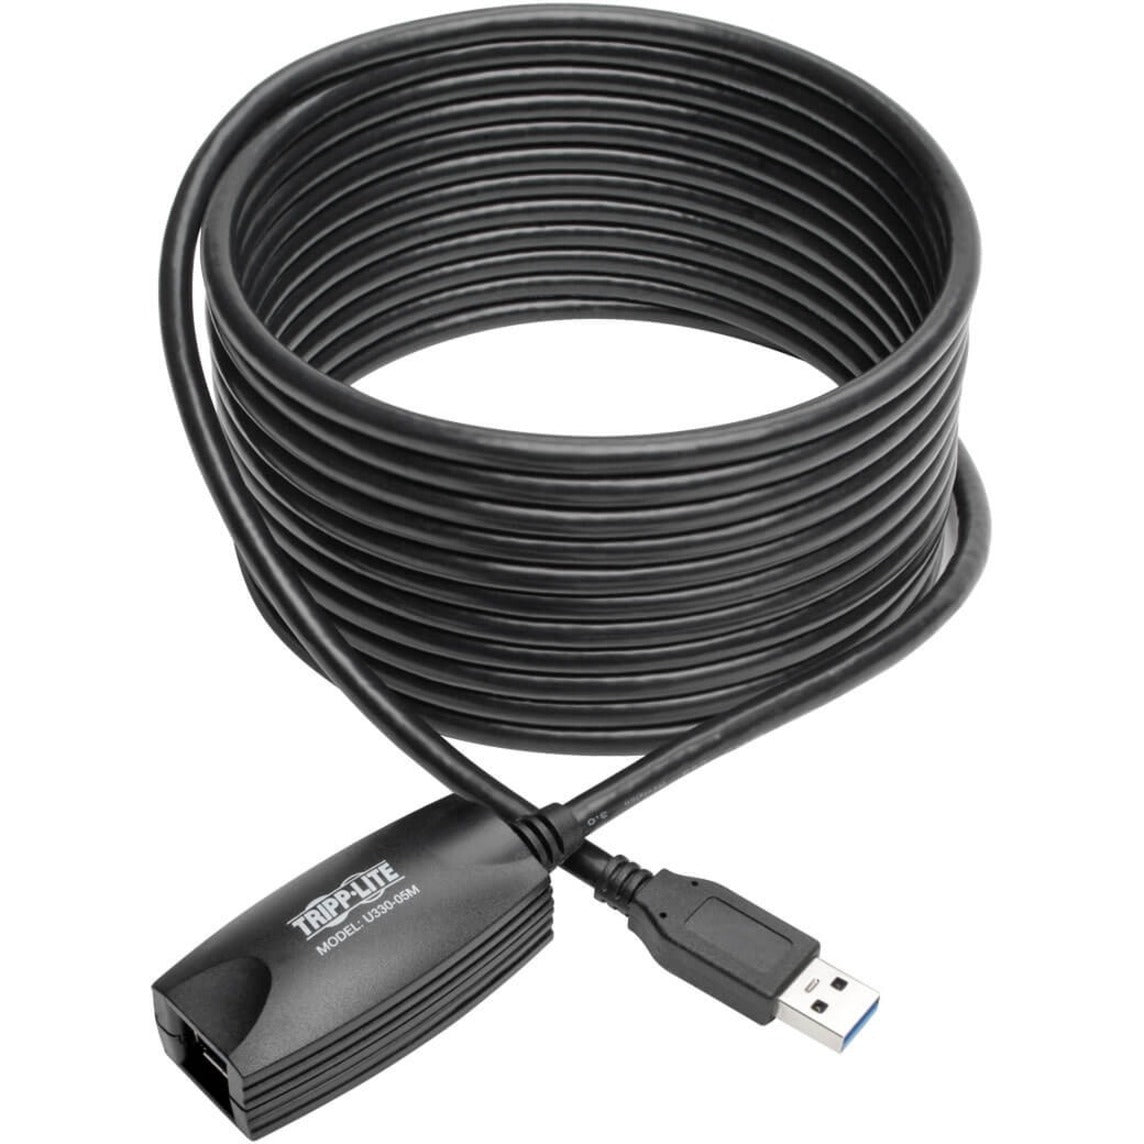 Tripp Lite U330-05M 5 meter USB3.0 Super Speed A/A Active Extension Cable, 16-ft, Gray